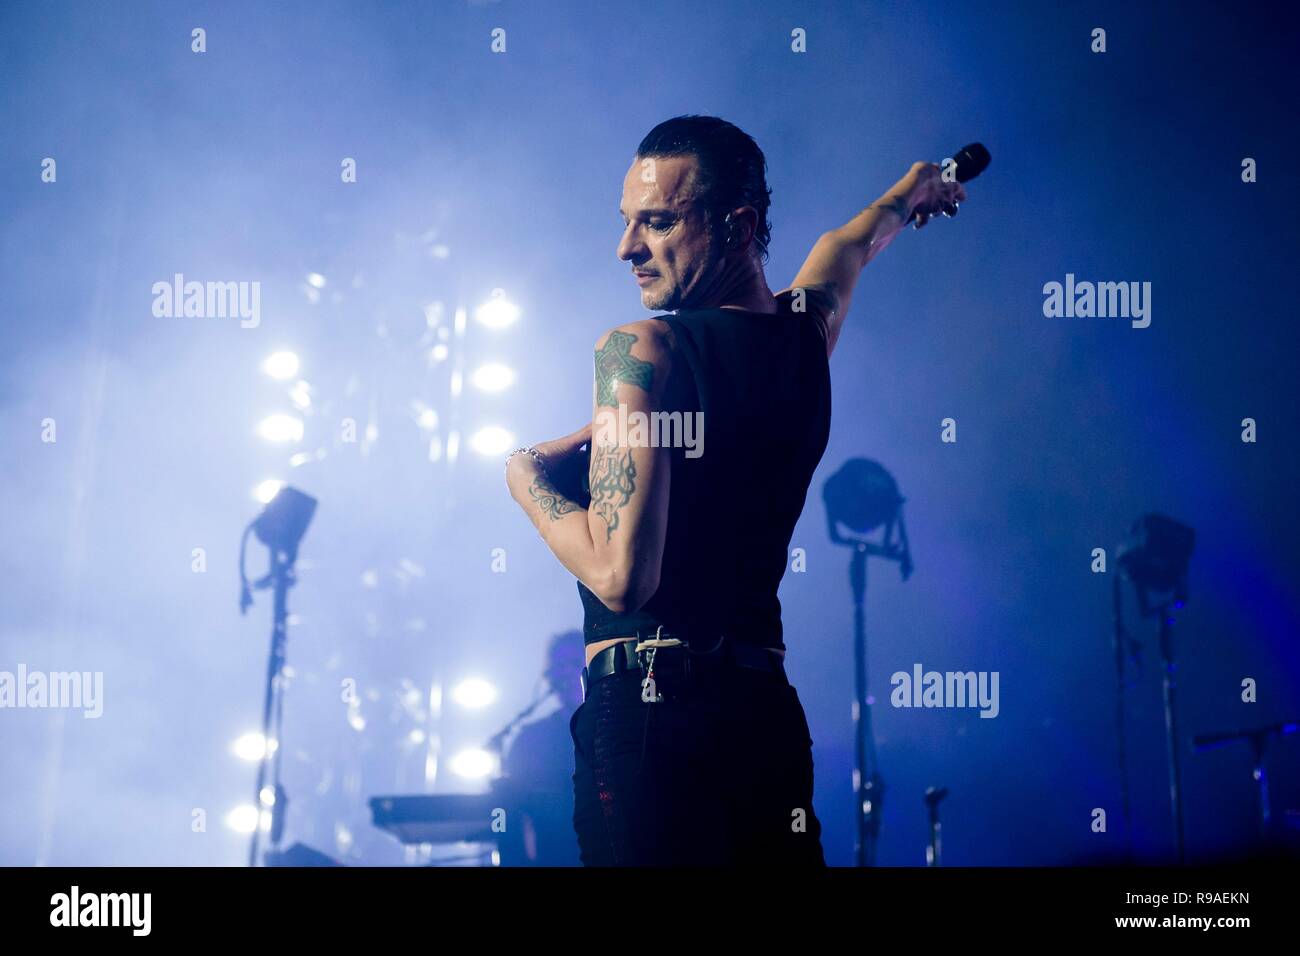 January 11, 2018 - The British synth rock and synth pop group Depeche Mode  live on their Global Spirit Tour at the Barclaycard Arena in Hamburg.  Singer and frontman Dave Gahan enjoys